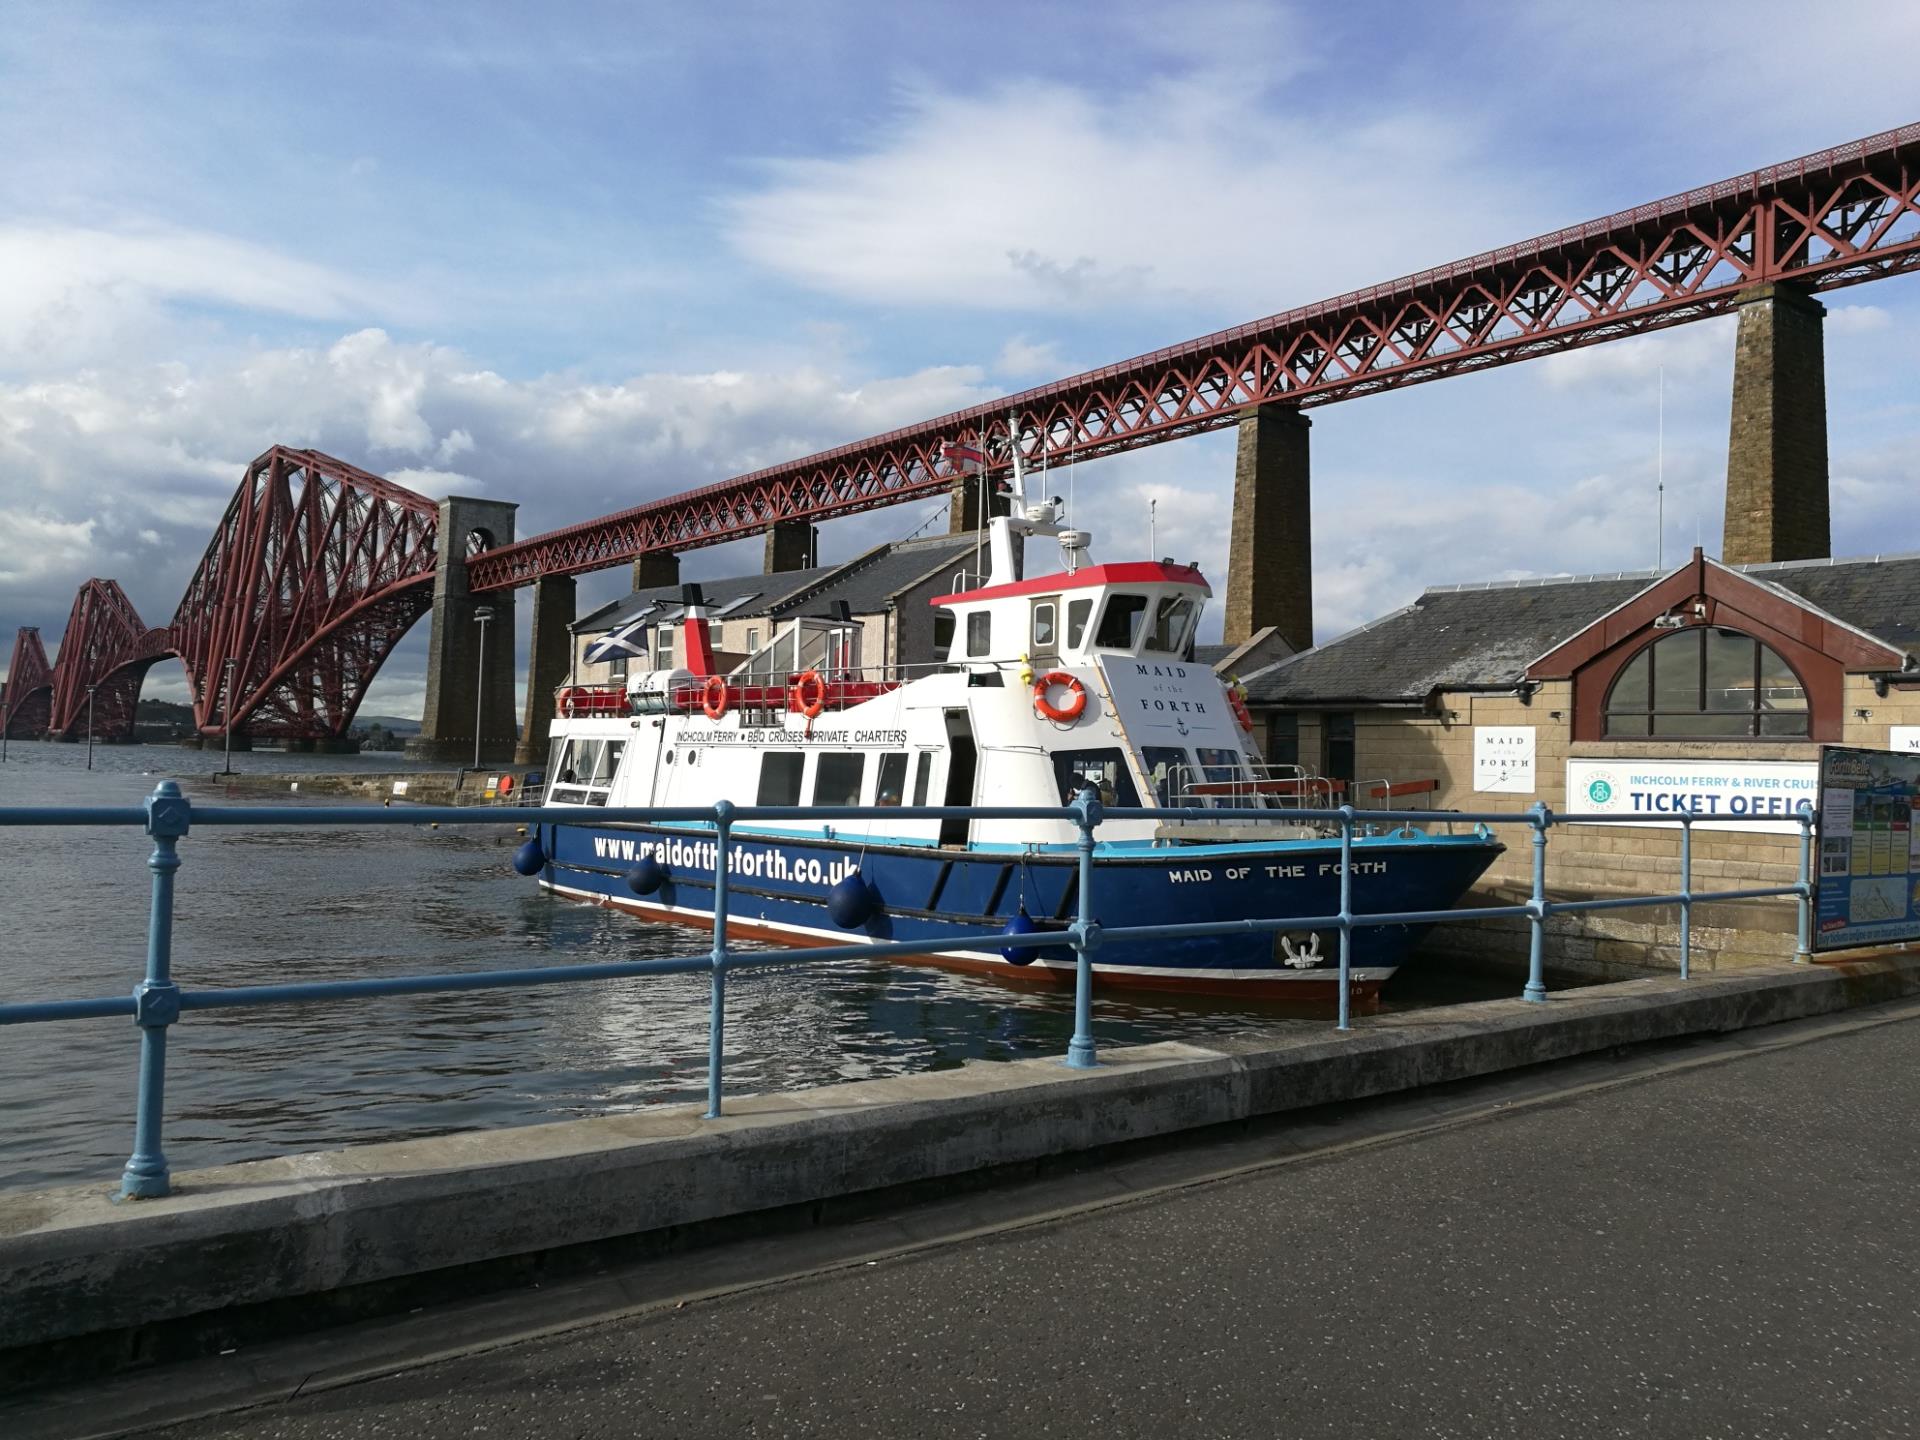 Maid of the Forth, South Queensferry